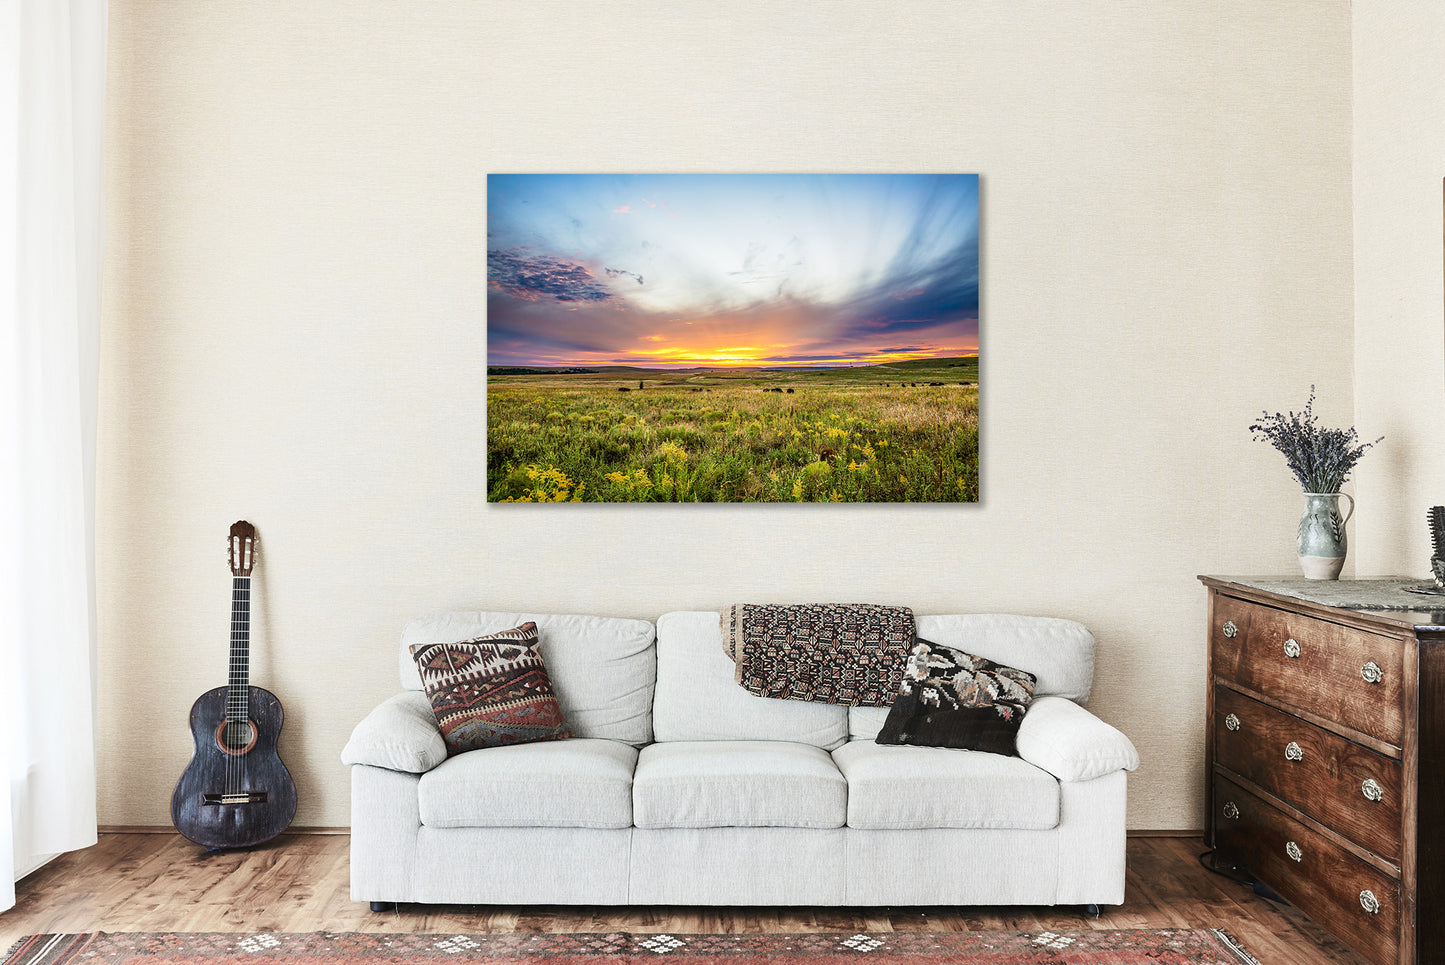 Great Plains Metal Print (Ready to Hang) Photo on Aluminum of Warm Sunset Over Tallgrass Prairie in Osage County Oklahoma Landscape Wall Art Western Decor